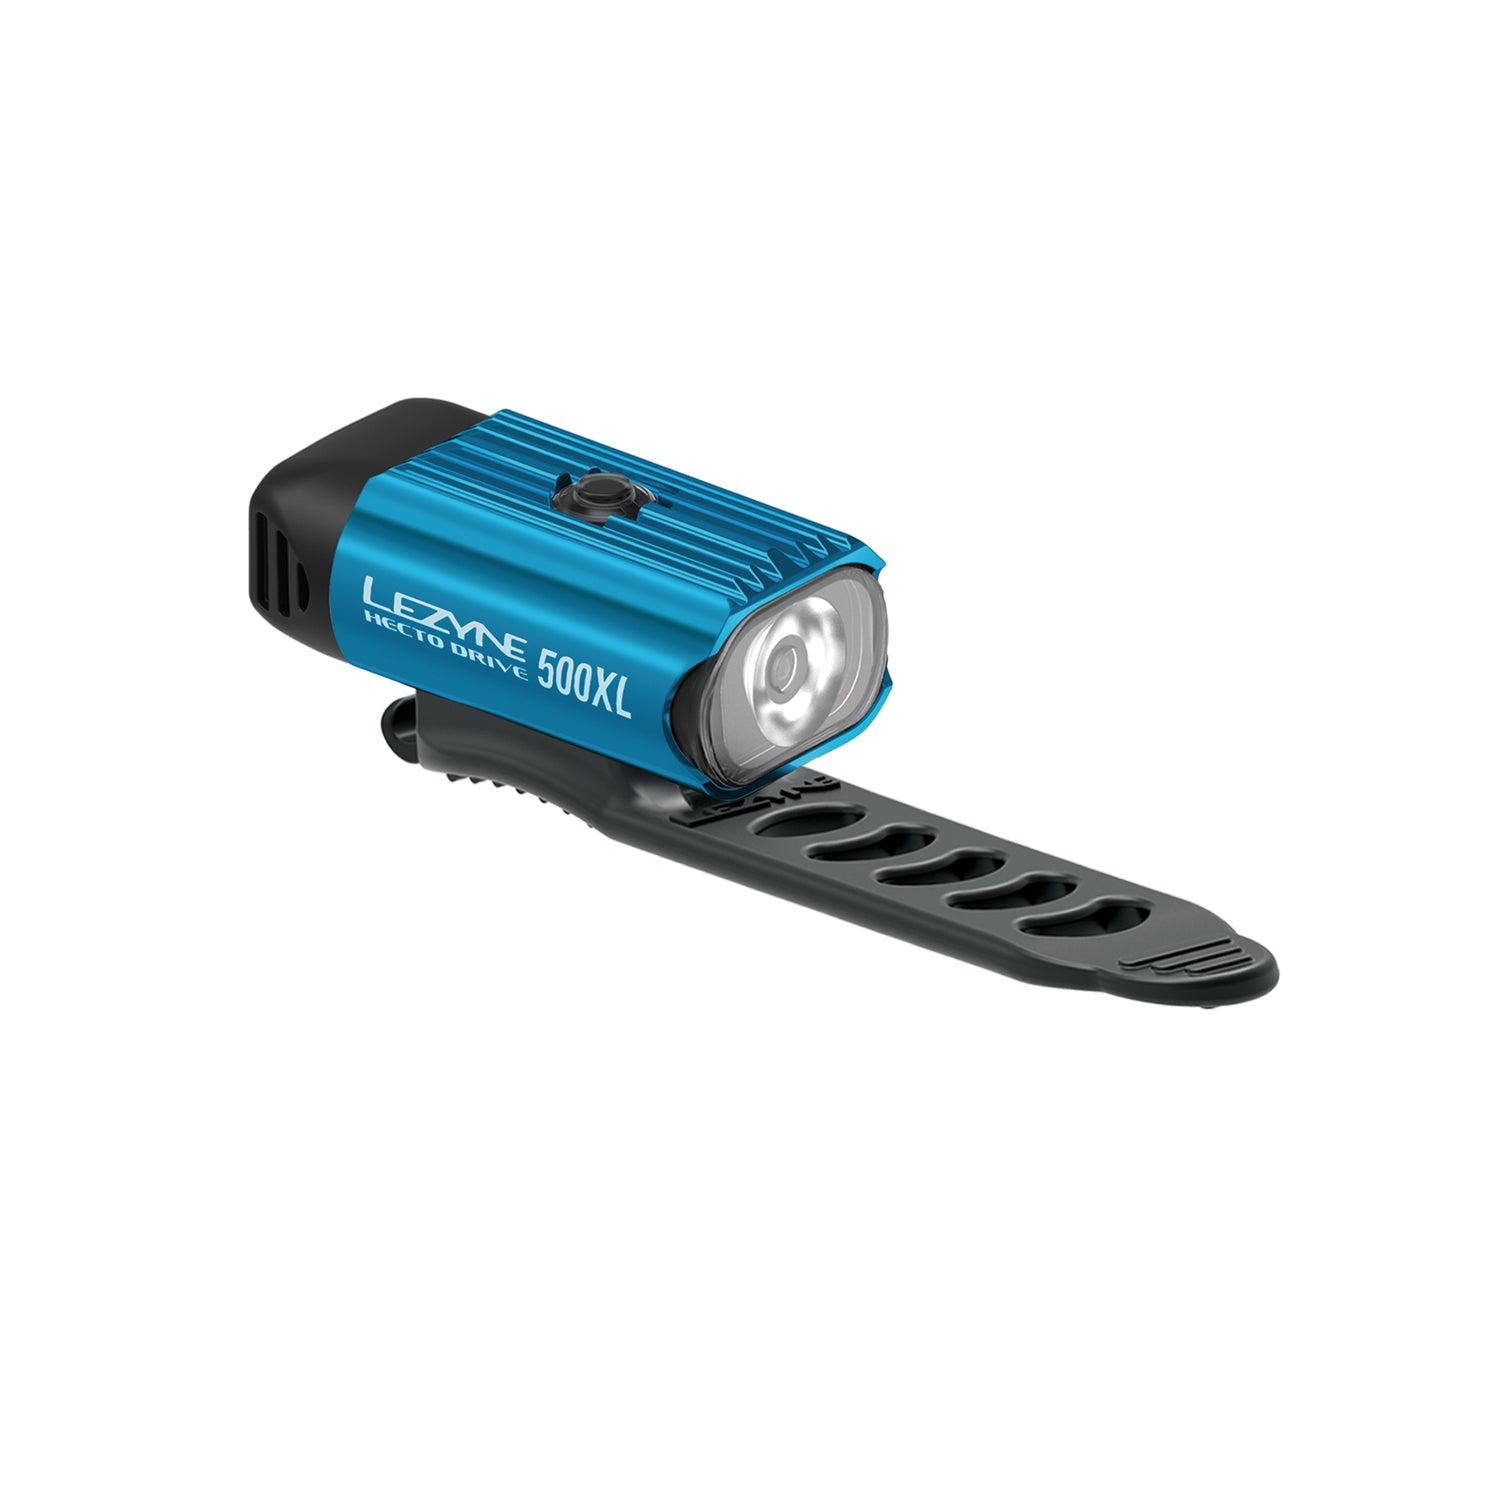 Blue Hecto Drive 500XL front bike light